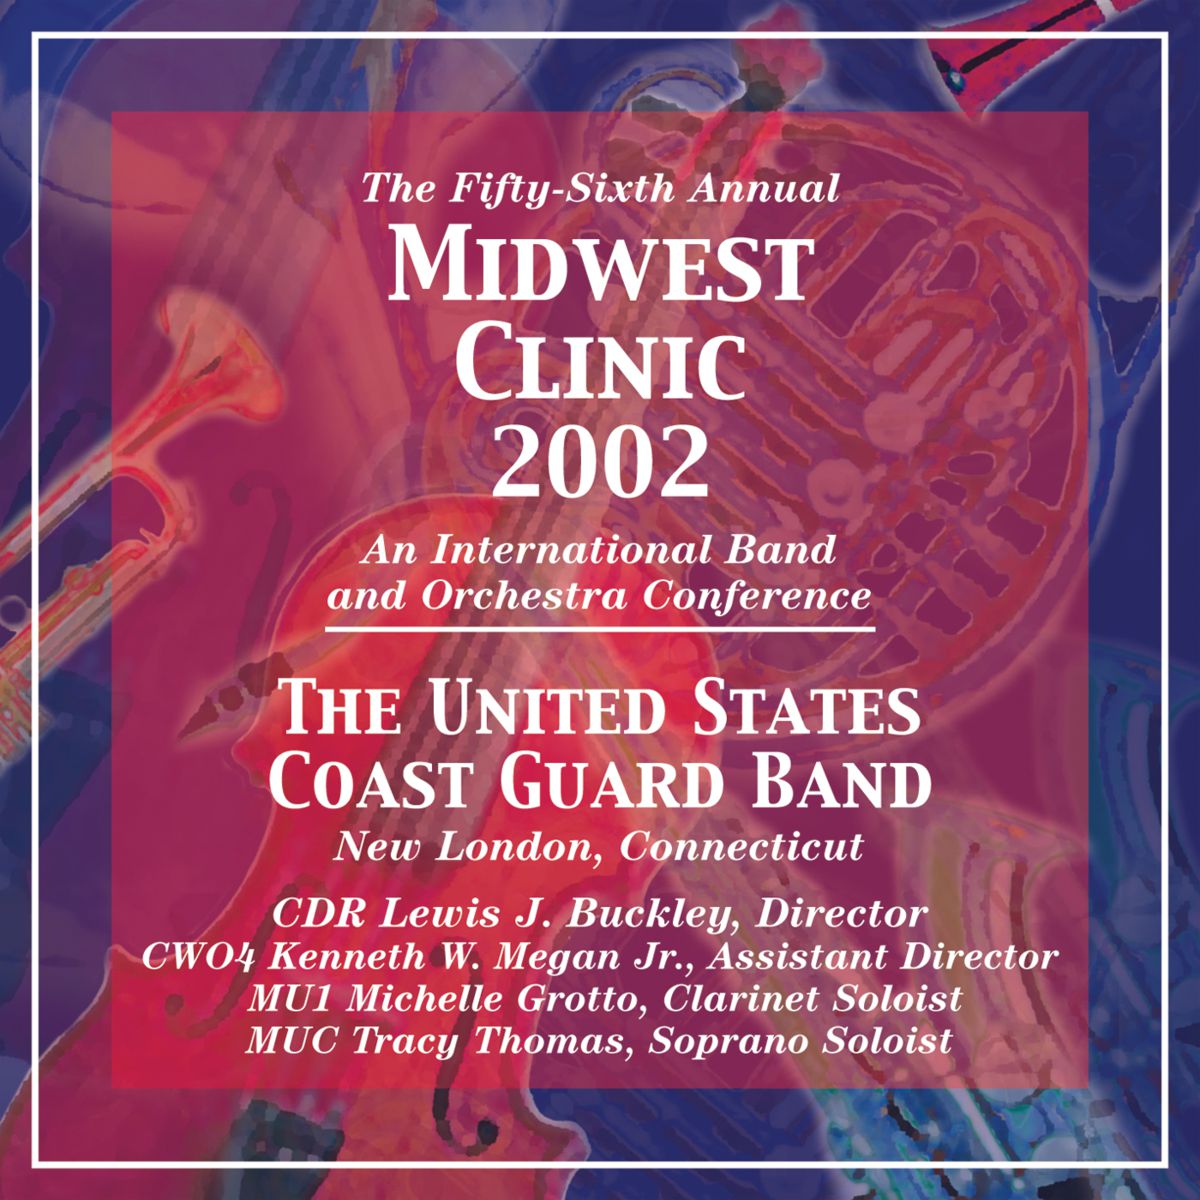 2002 Midwest Clinic: The United States Coast Guard Band - cliquer ici